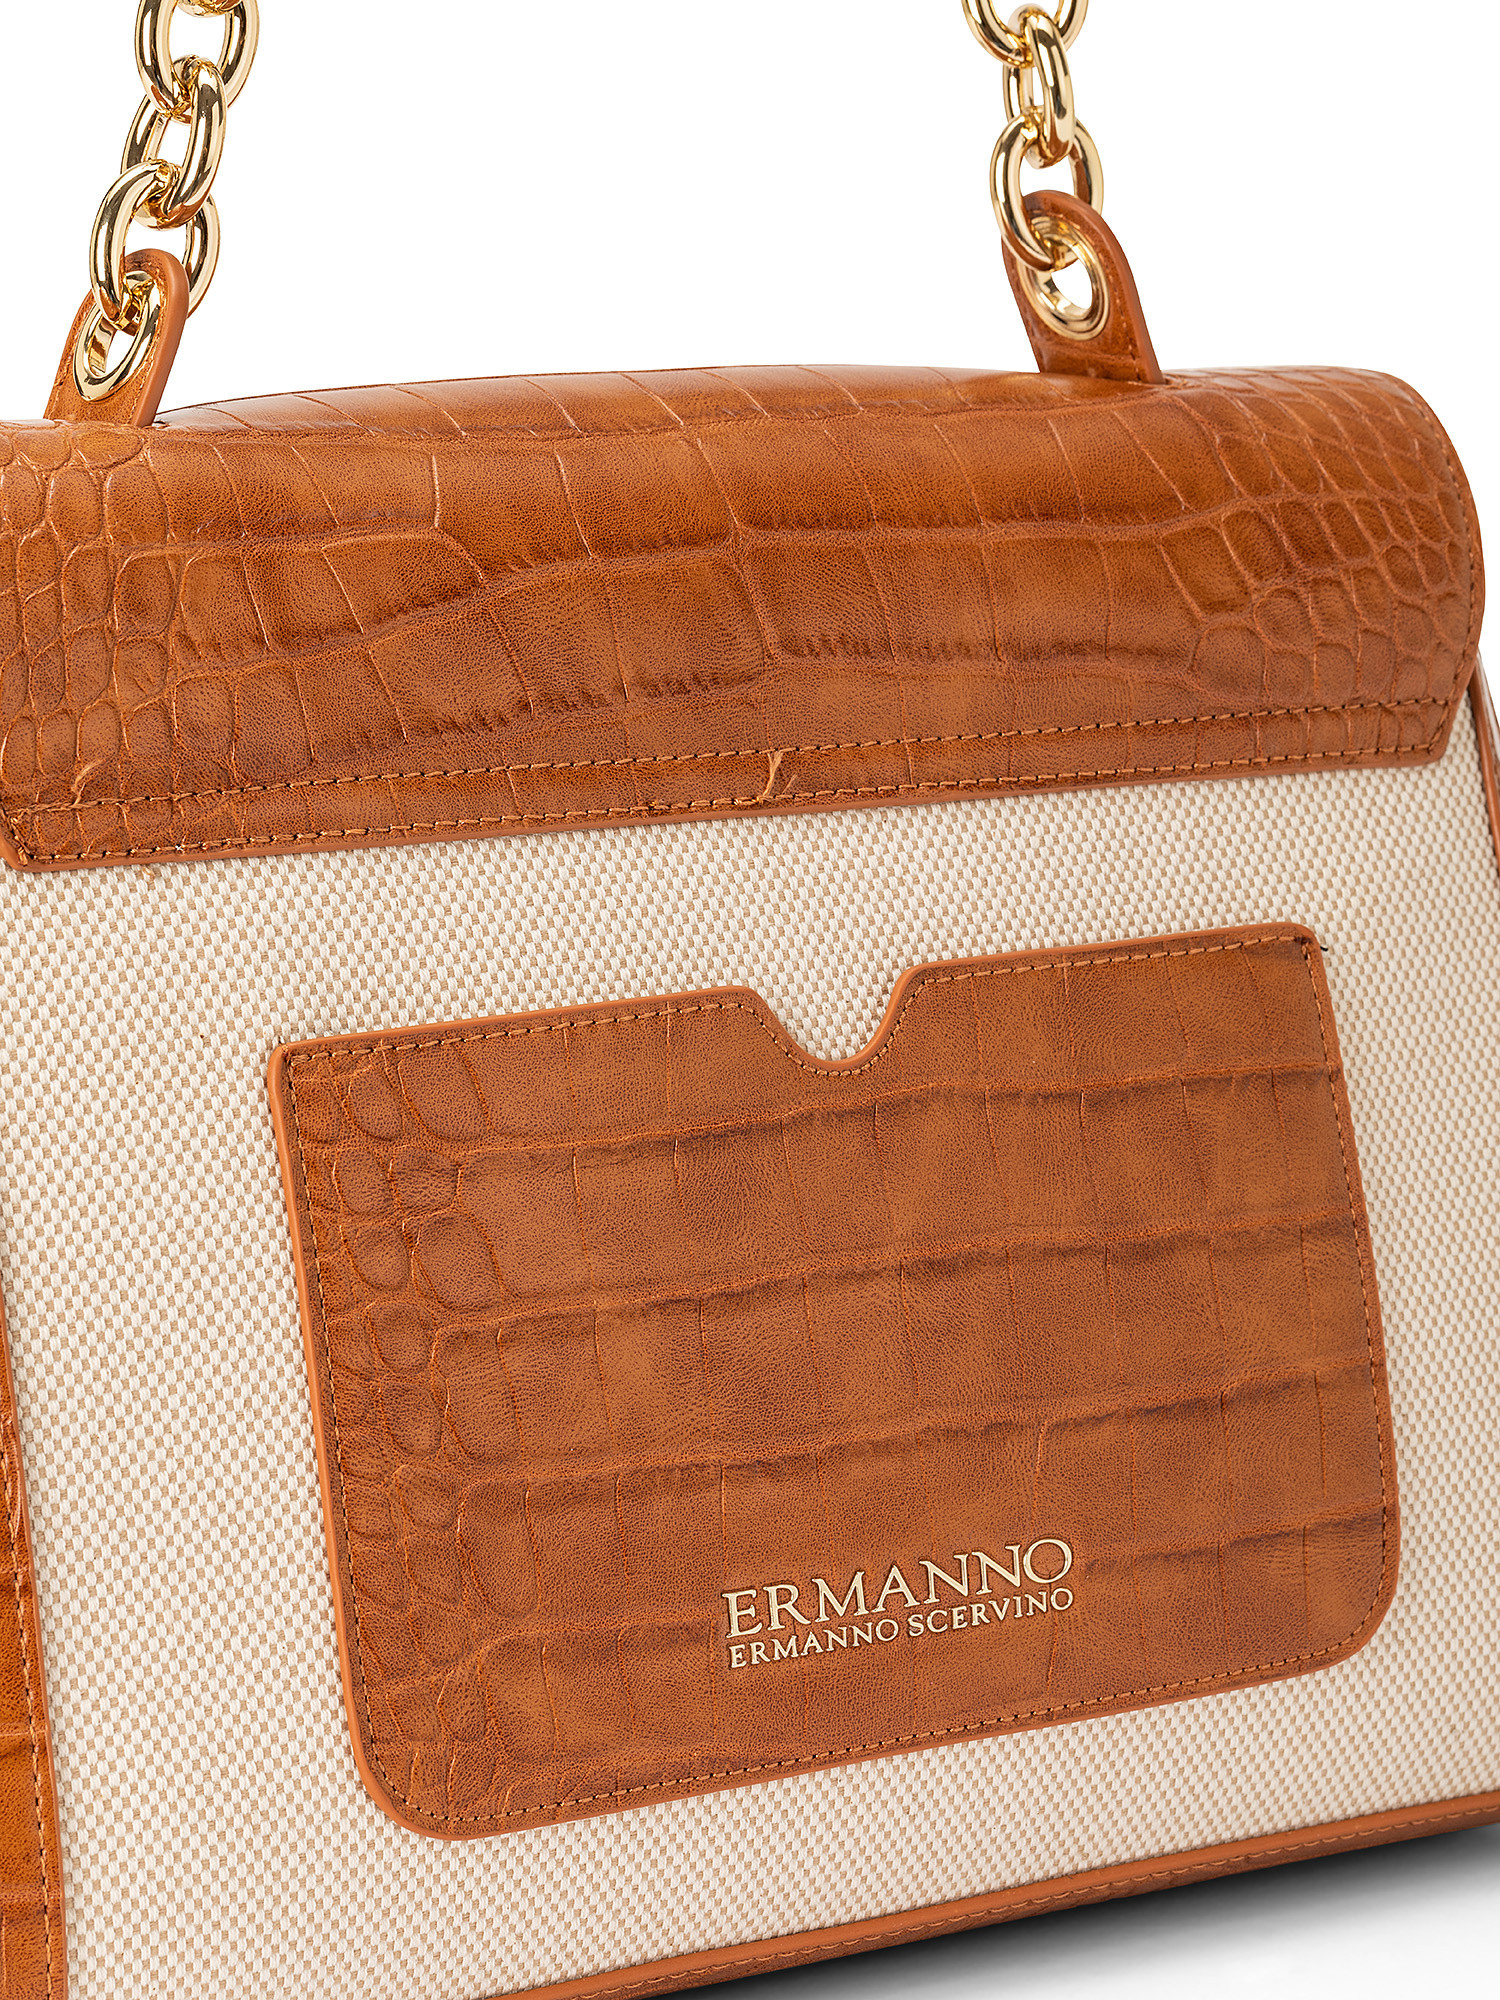 Flap Eba small canvas bag, Brown, large image number 2